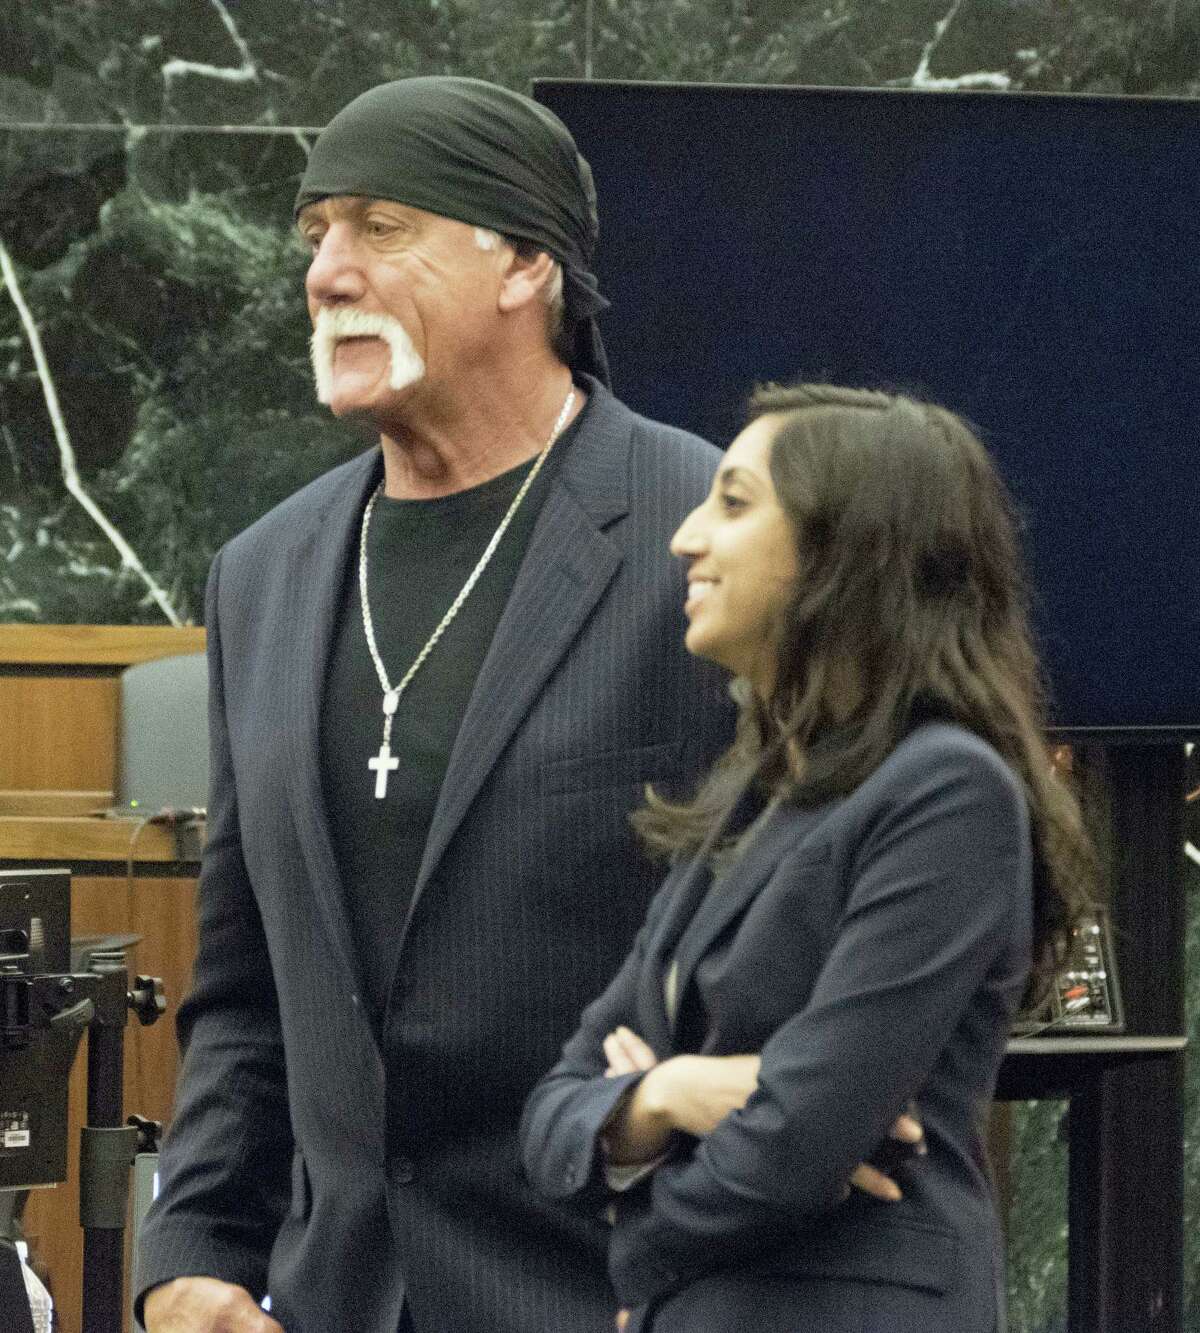 Former professional wrestler Hulk Hogan, left, along with attorney Seema Ghatnekar prepare to take a break just after the jury was handed Hogan’s case against Gawker Media for deliberations on Friday, March 18, 2016, in St. Petersburg, Fla. Hogan, whose given name is Terry Bollea, is suing Gawker for $100 million for posting a video of him having sex with his former best friend’s wife. Hogan contends the 2012 post violated his privacy.